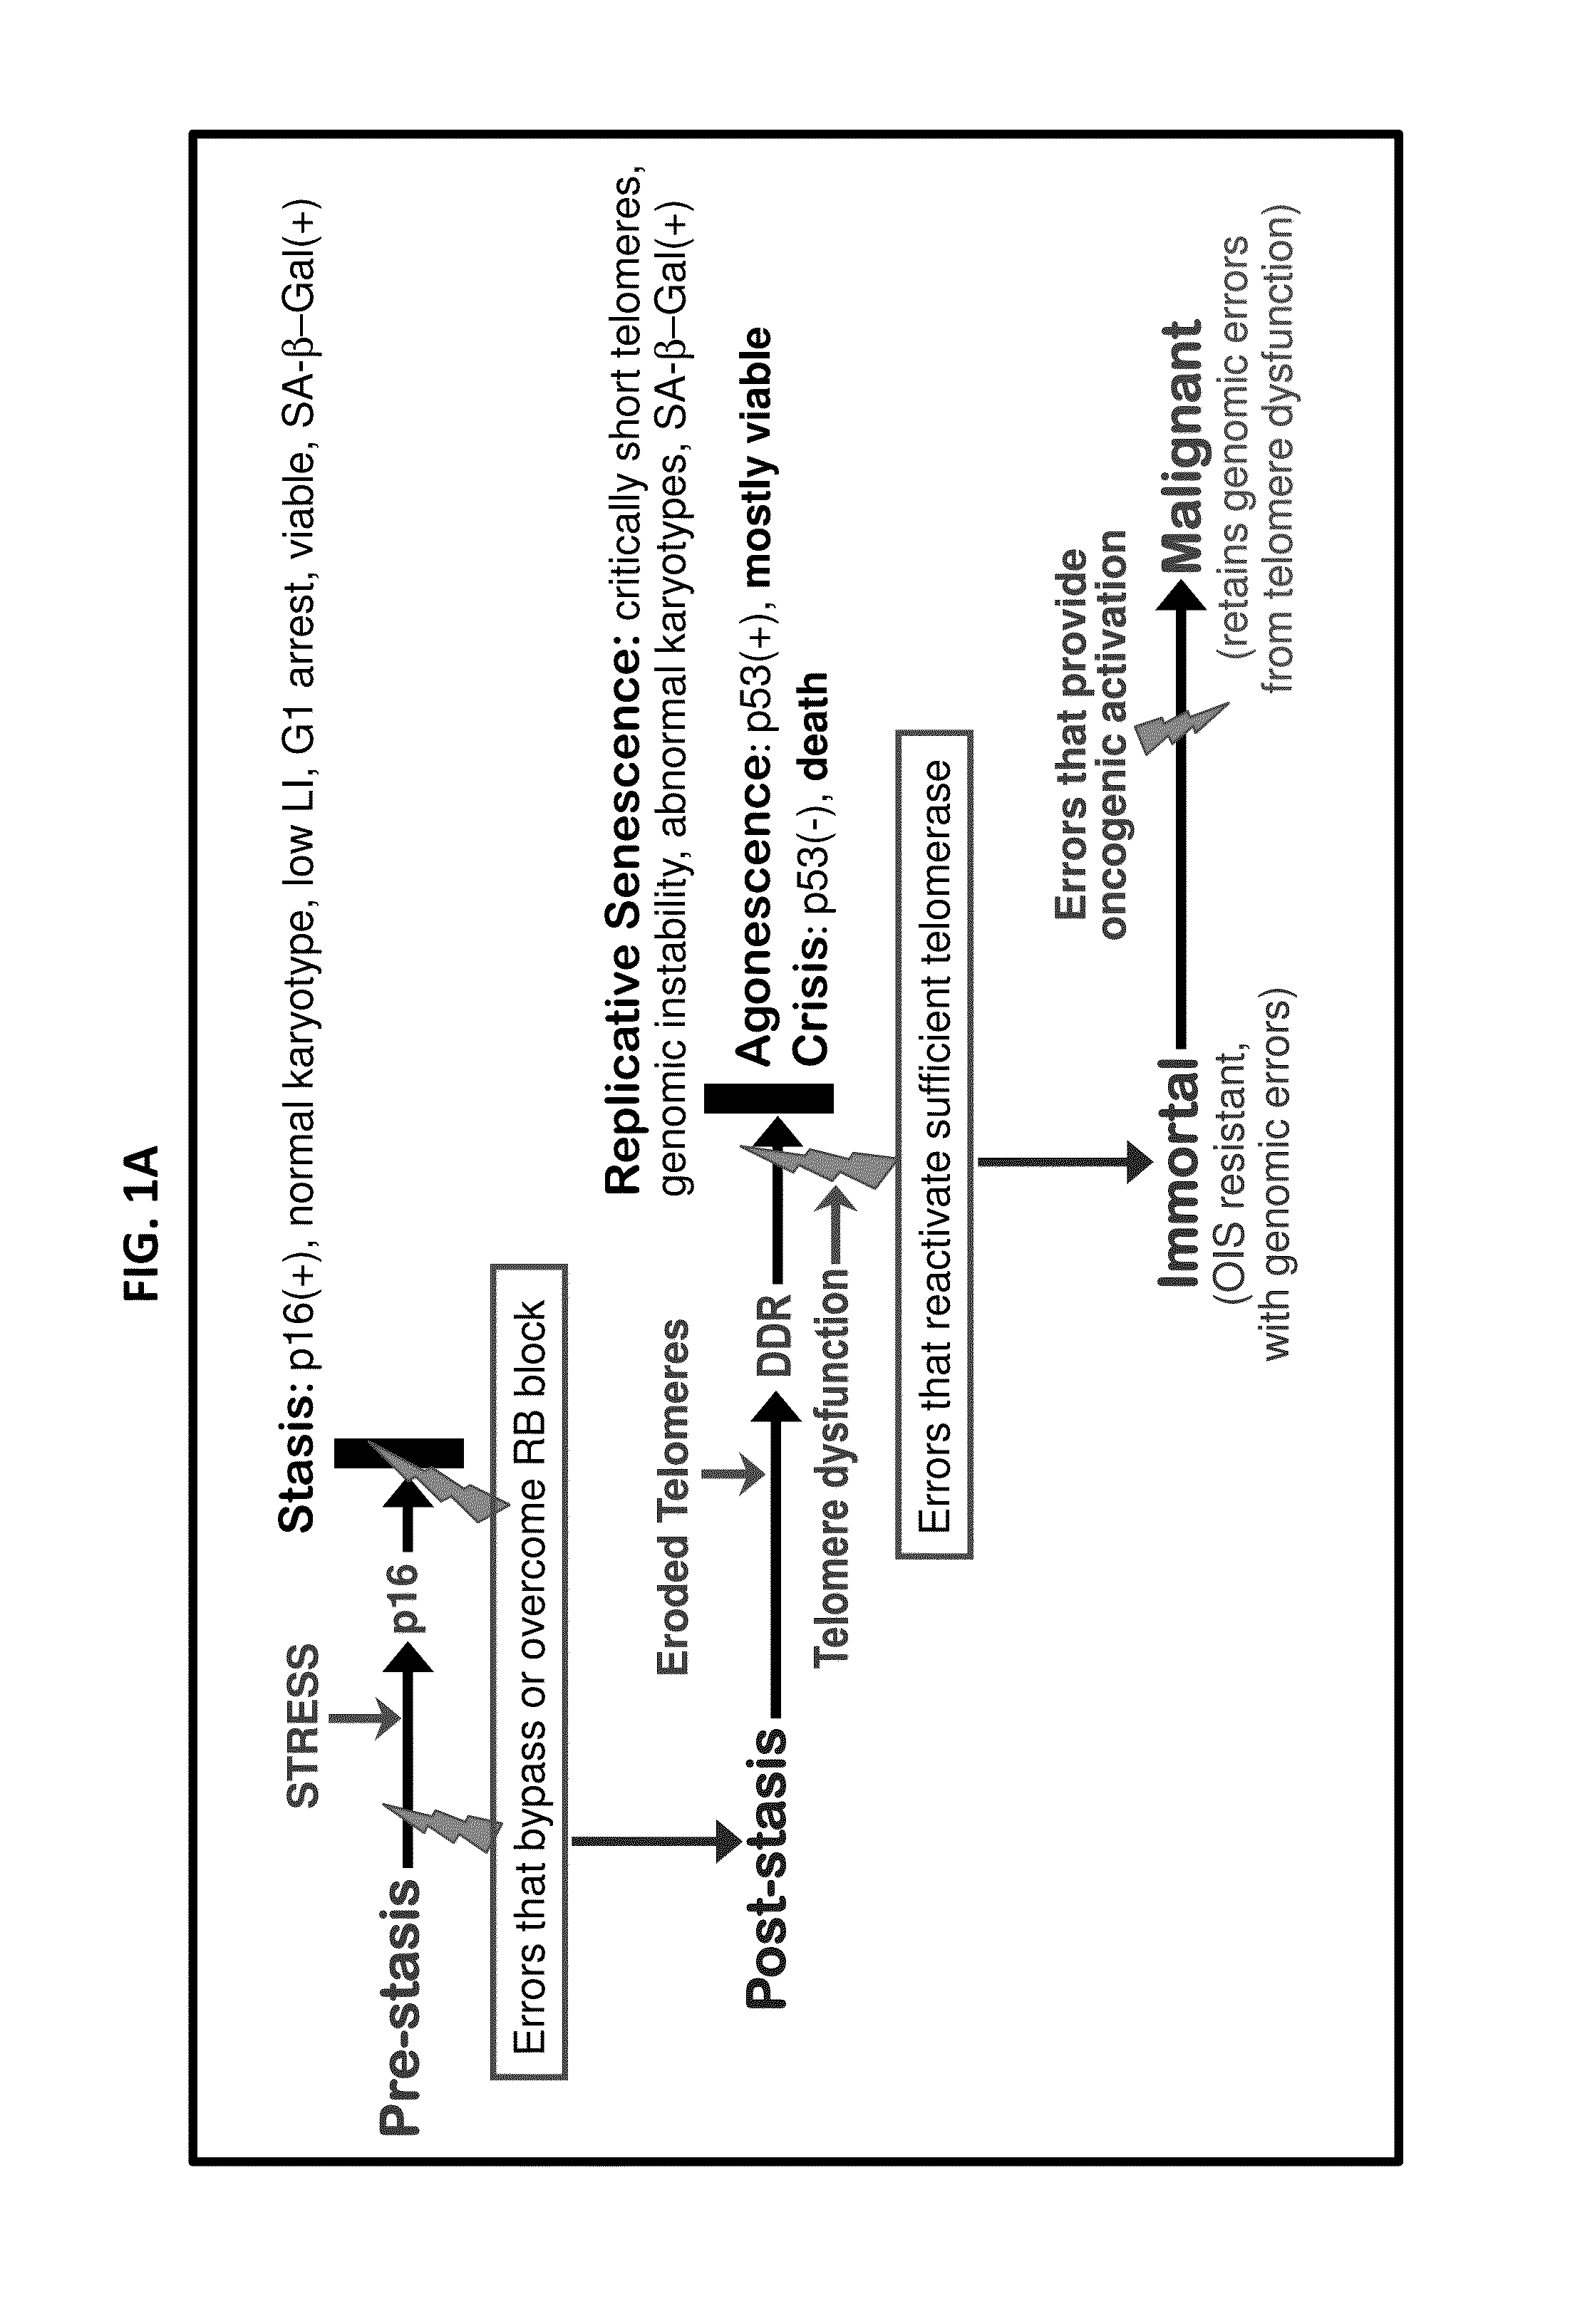 Methods for Efficient Immortalization Of Normal Human Cells